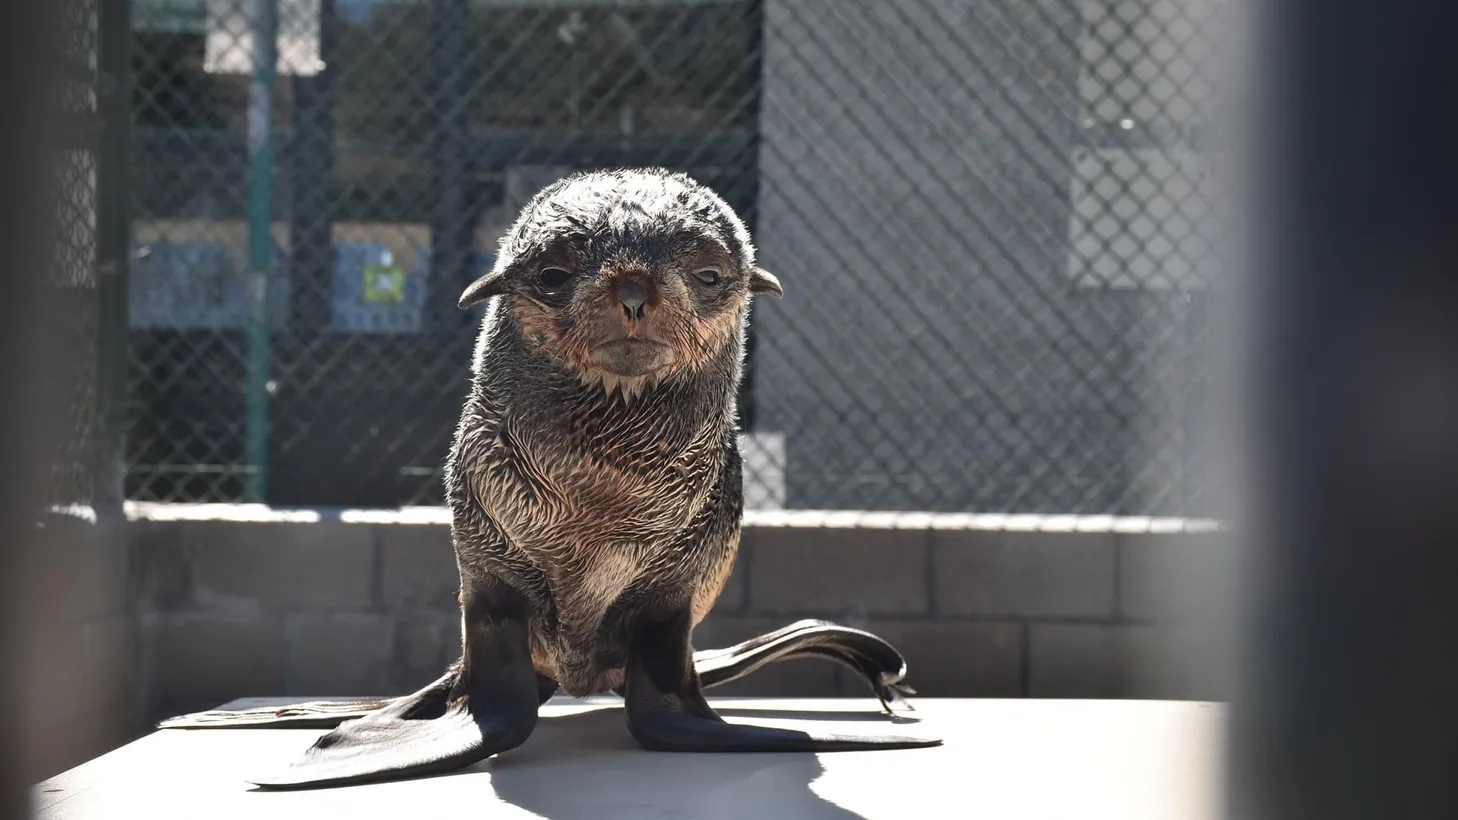 A young northern fur seal curiously looks out of its pen at the Marine Mammal Care Center LA in San Pedro. With its oval face and pointy ears, the seal looks a bit like Yoda from “Star Wars.”